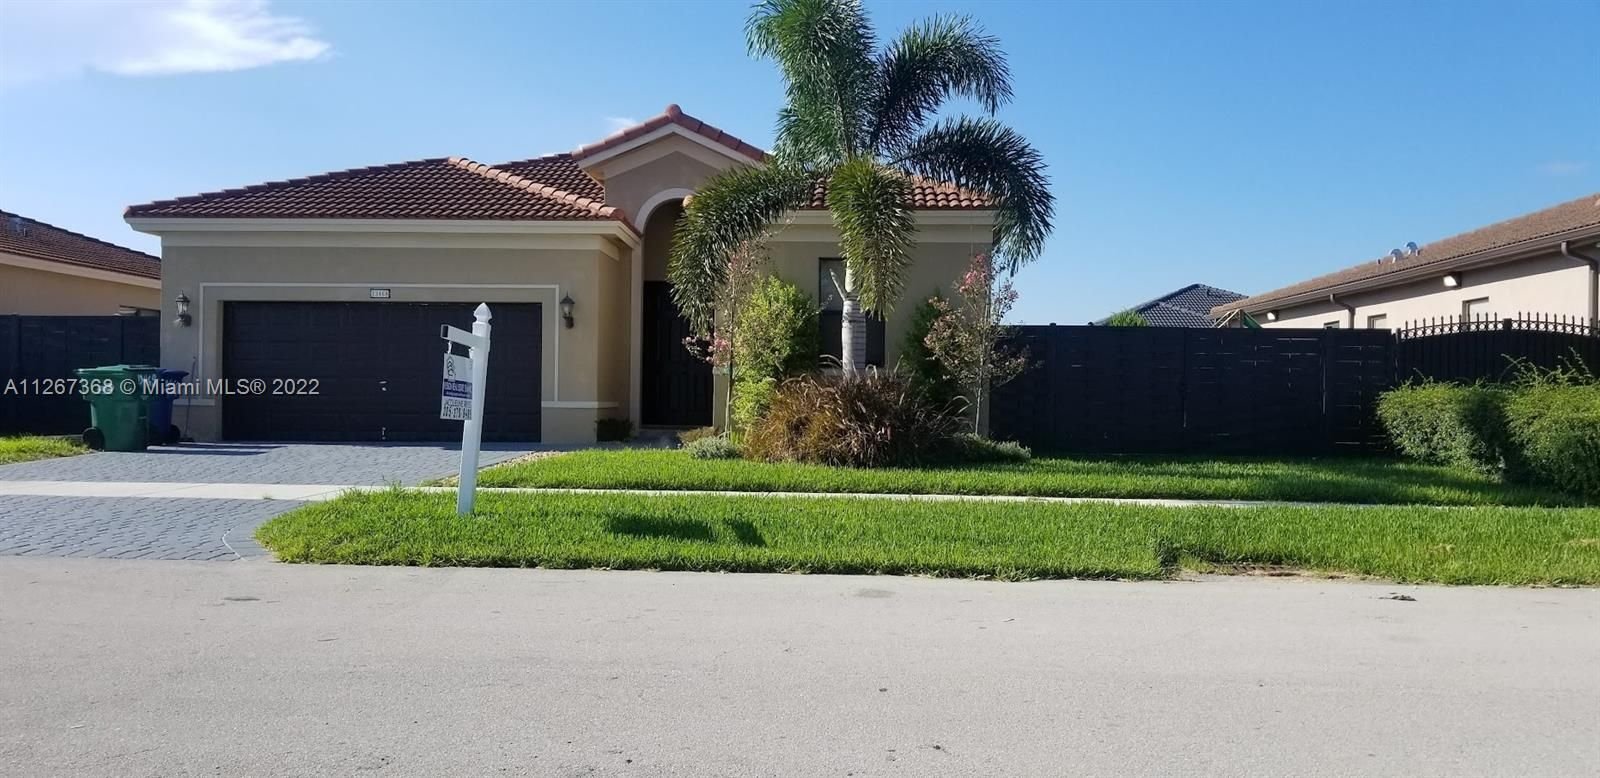 Real estate property located at 13468 277th St, Miami-Dade County, Homestead, FL